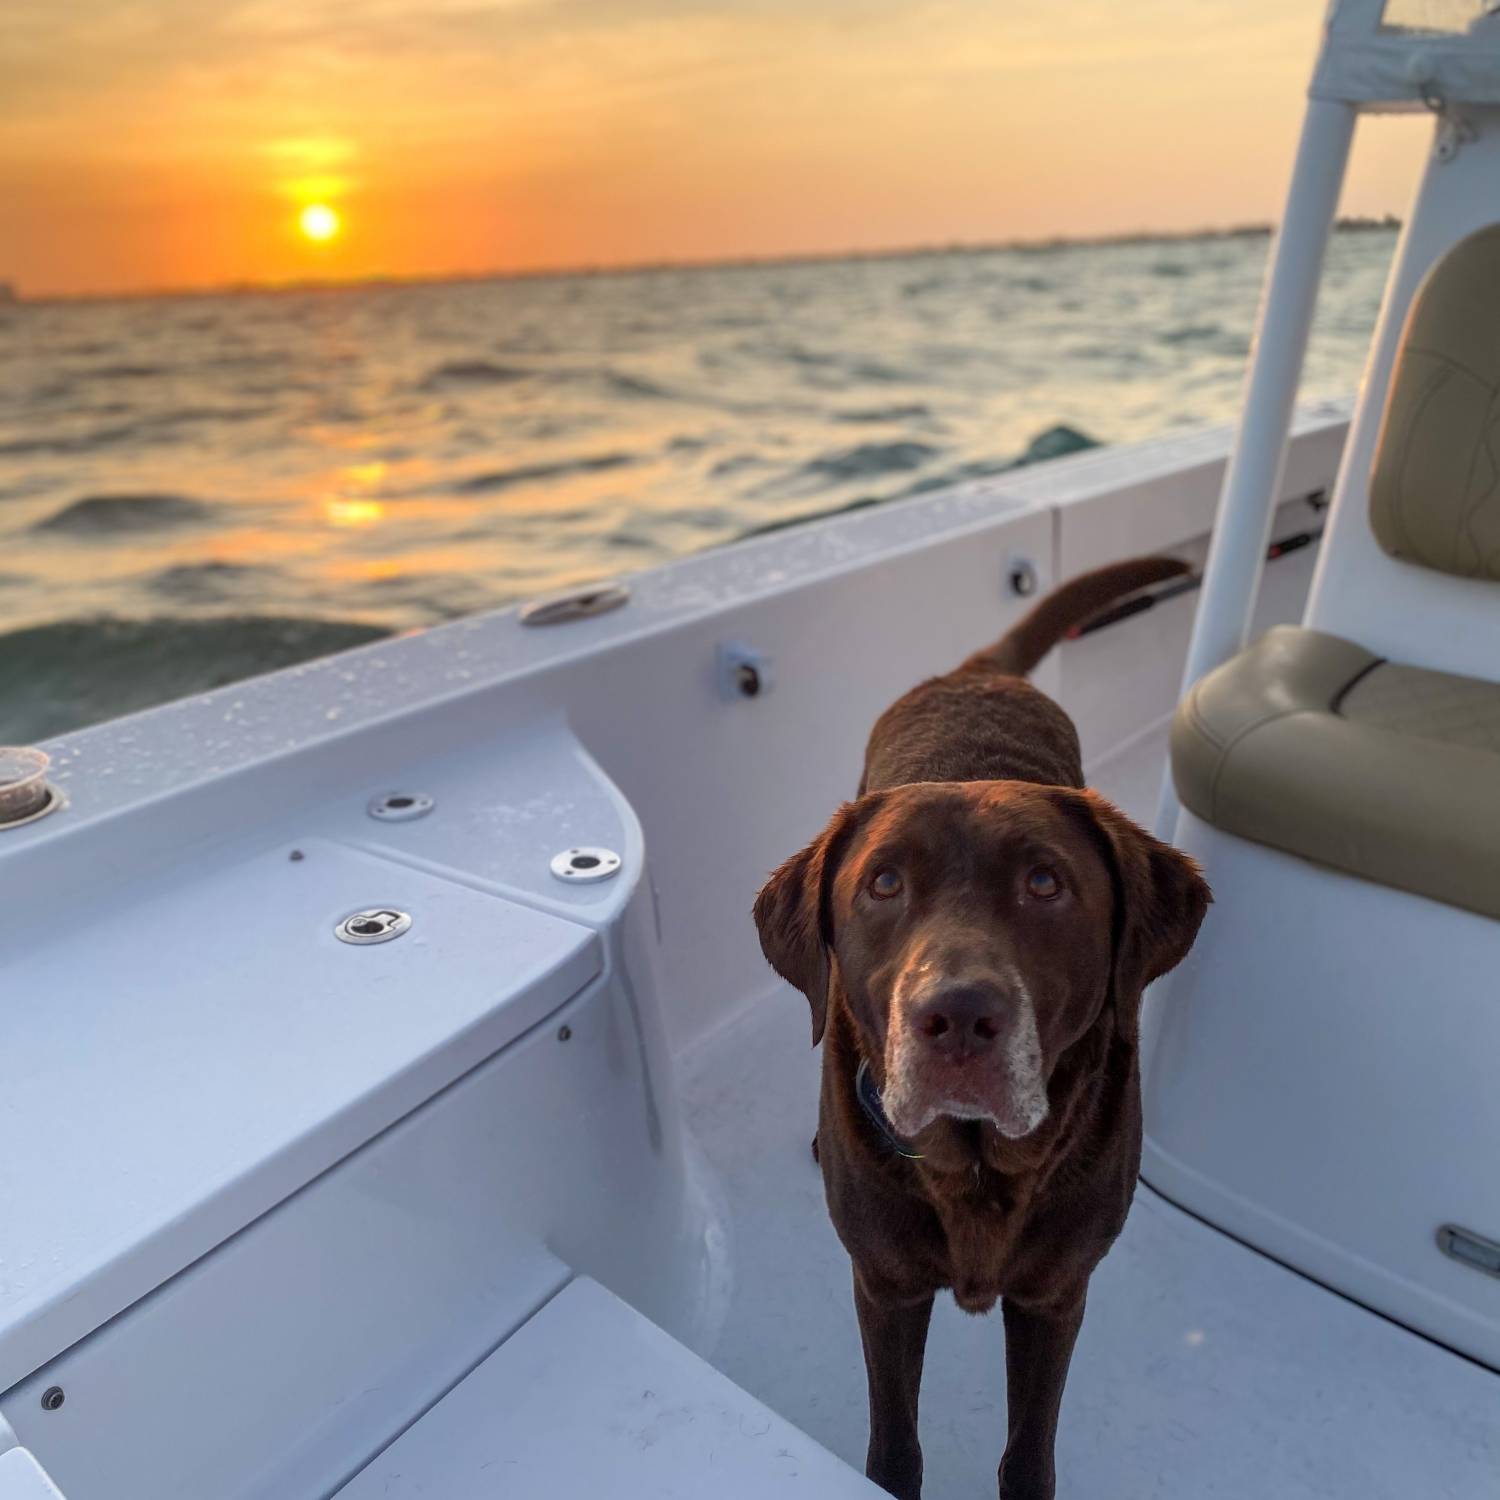 Title: Pawsome sunset - On board their Sportsman Masters 247 Bay Boat - Location: Marathon, Florida. Participating in the Photo Contest #SportsmanSeptember